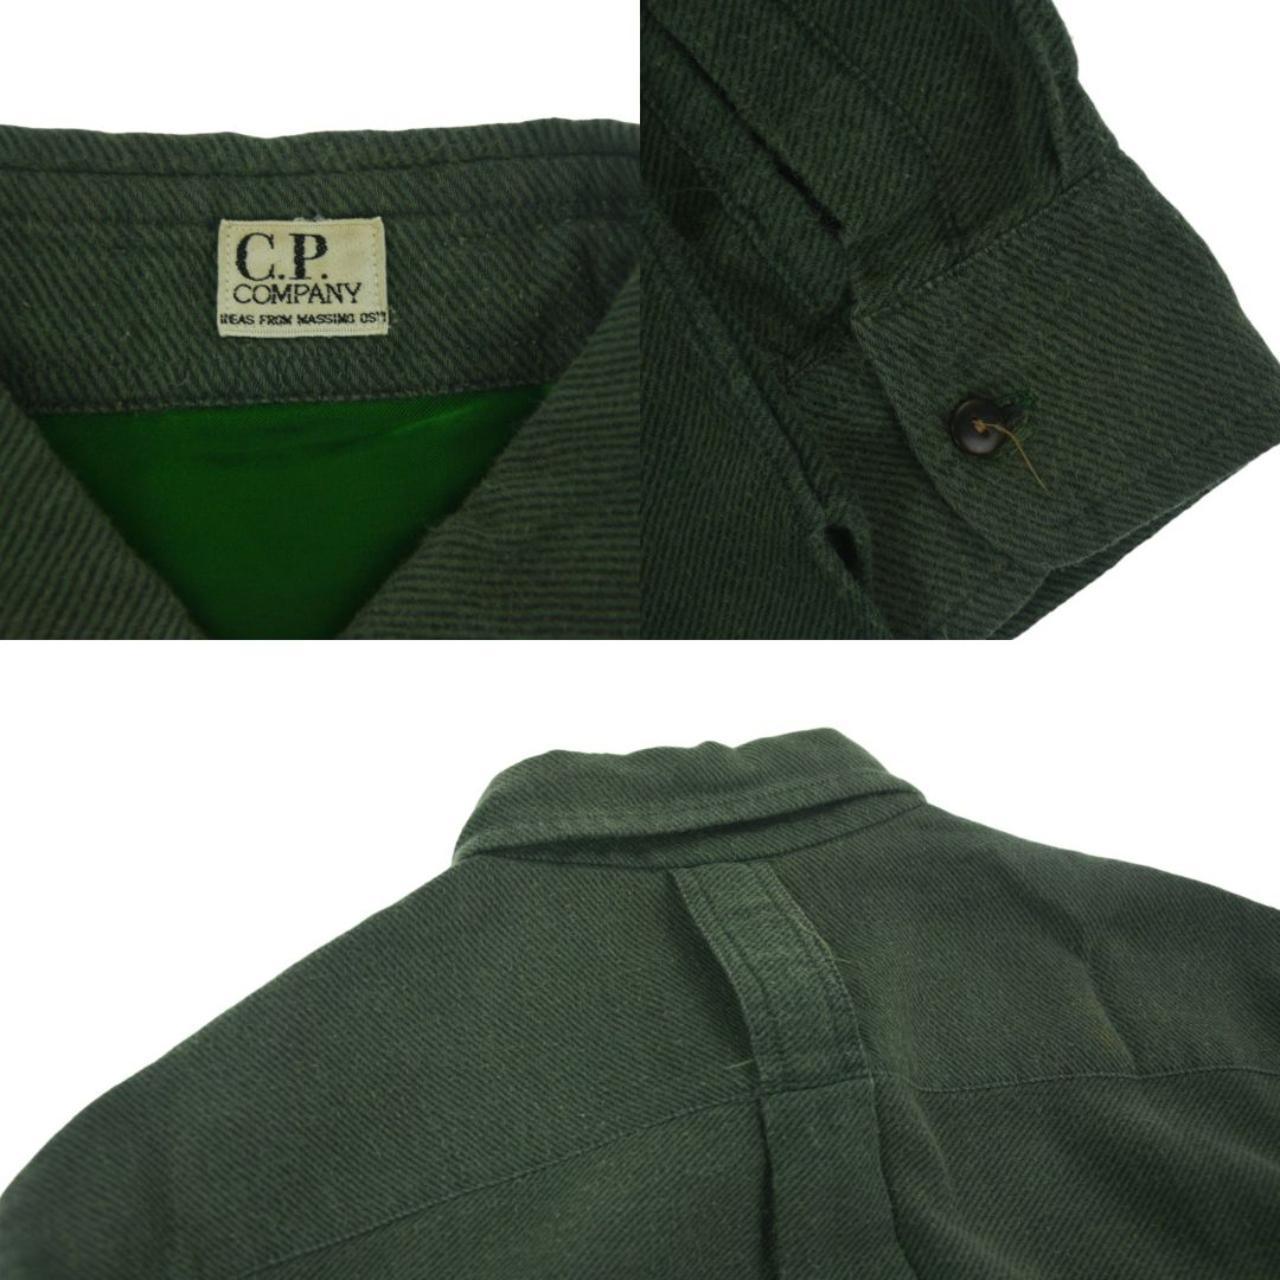 Vintage CP Company Pocket Shirt Size M - Known Source